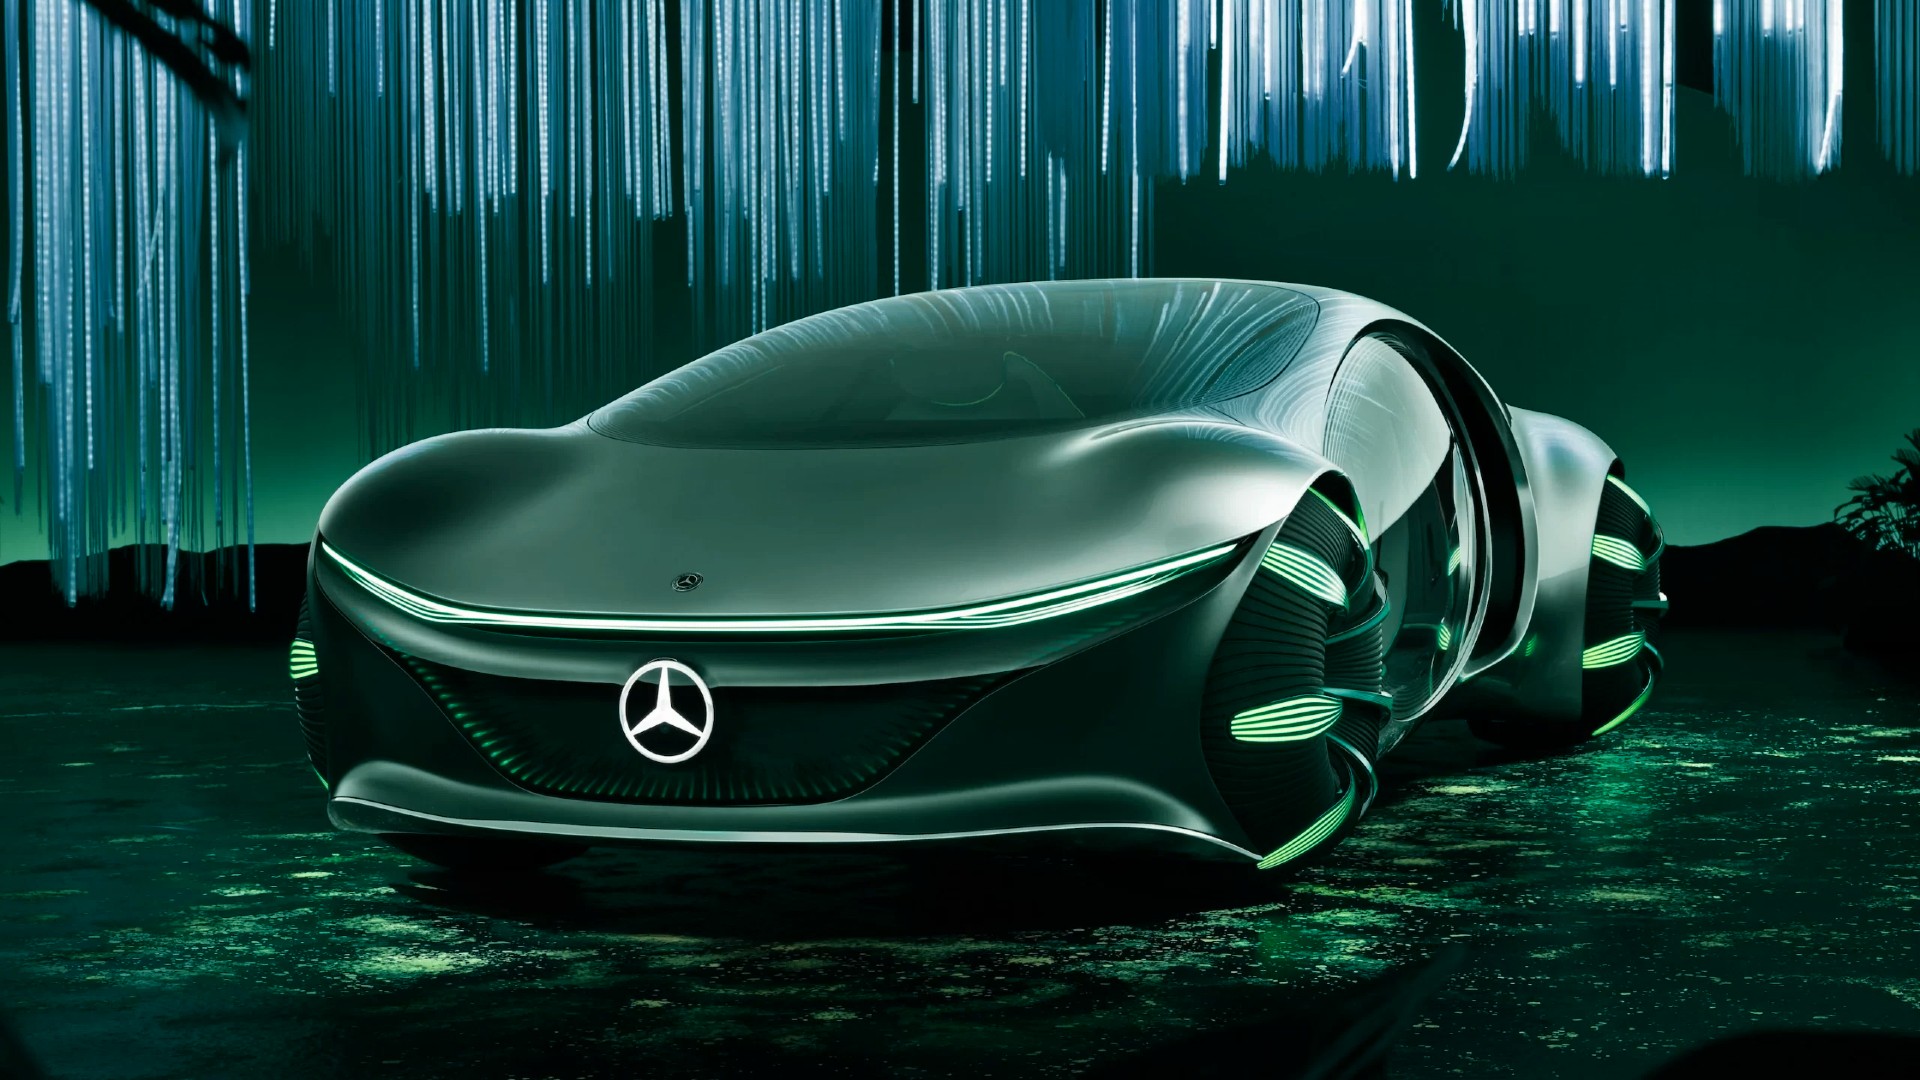 Mercedes-Benz joins Aura Blockchain Consortium to Elevate its Digital  Luxury Offering to the Next Level